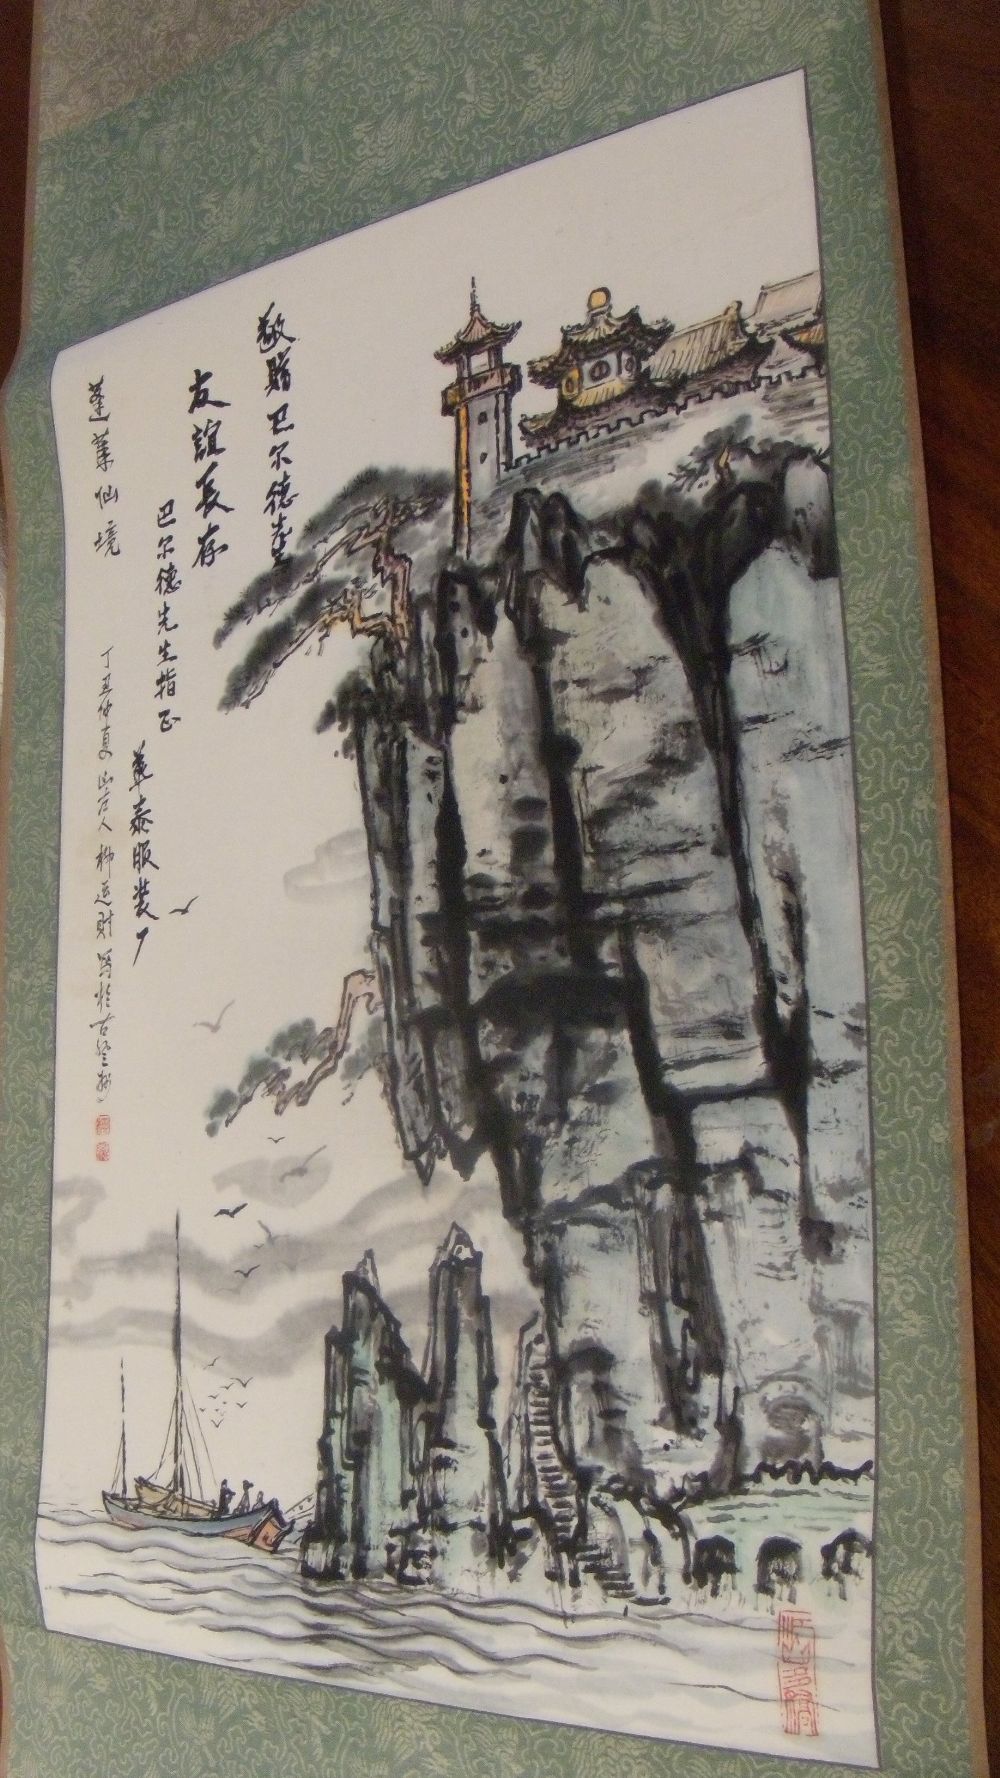 A 20th century scroll painting of the Penglai pavilion on its cliff top in Shandong province, with